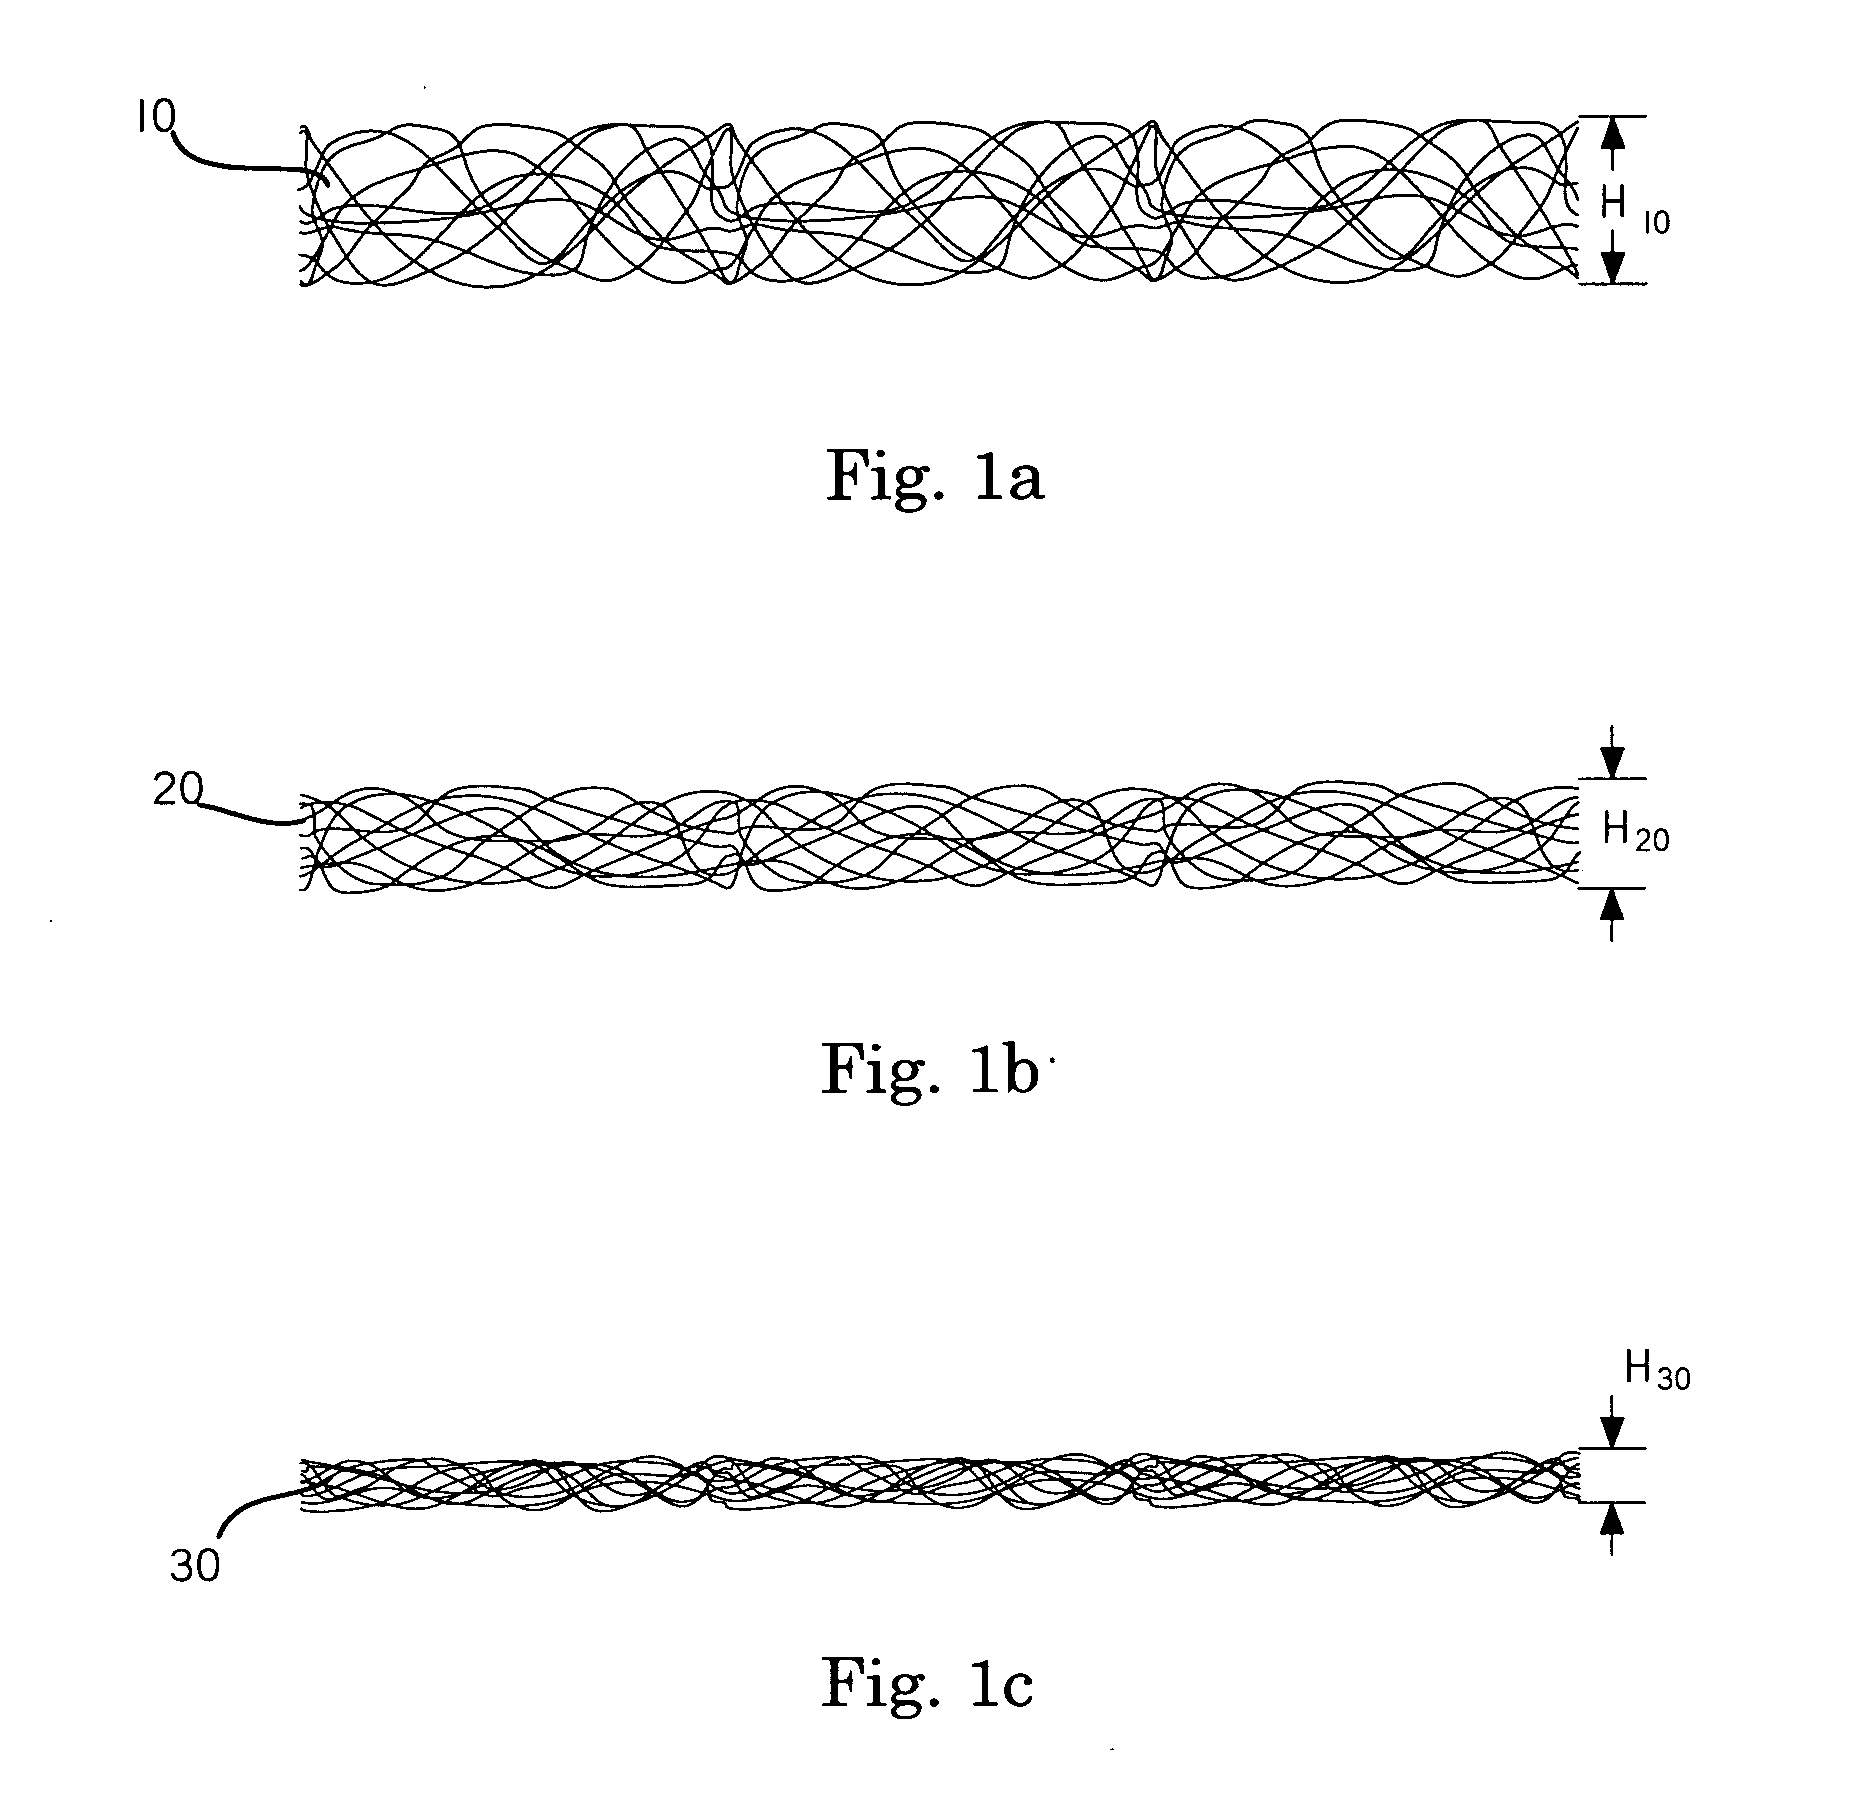 Planar-formed absorbent core structures